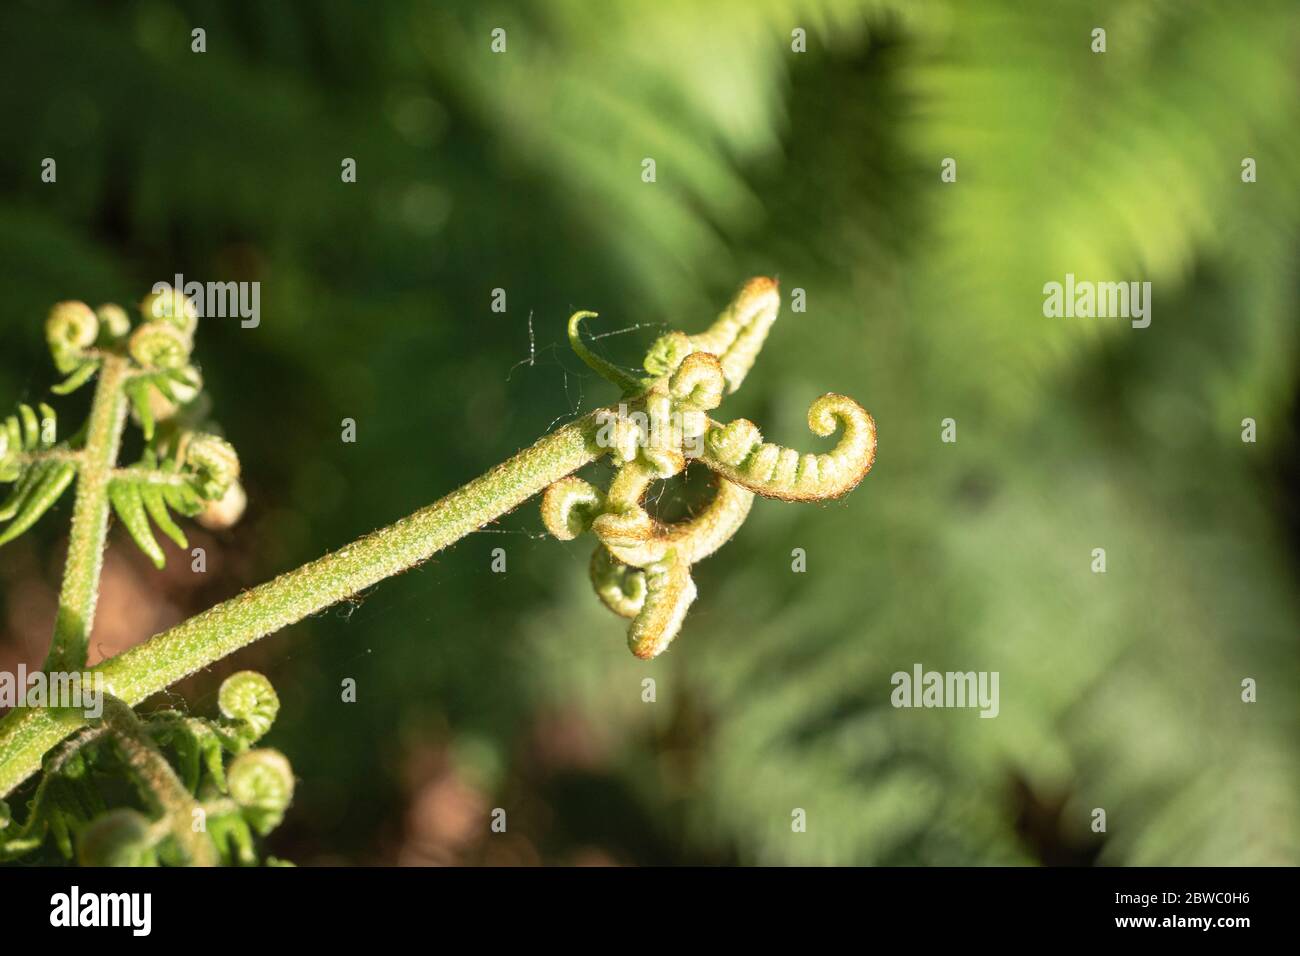 A fern in the sunlight with a green blurry background Stock Photo